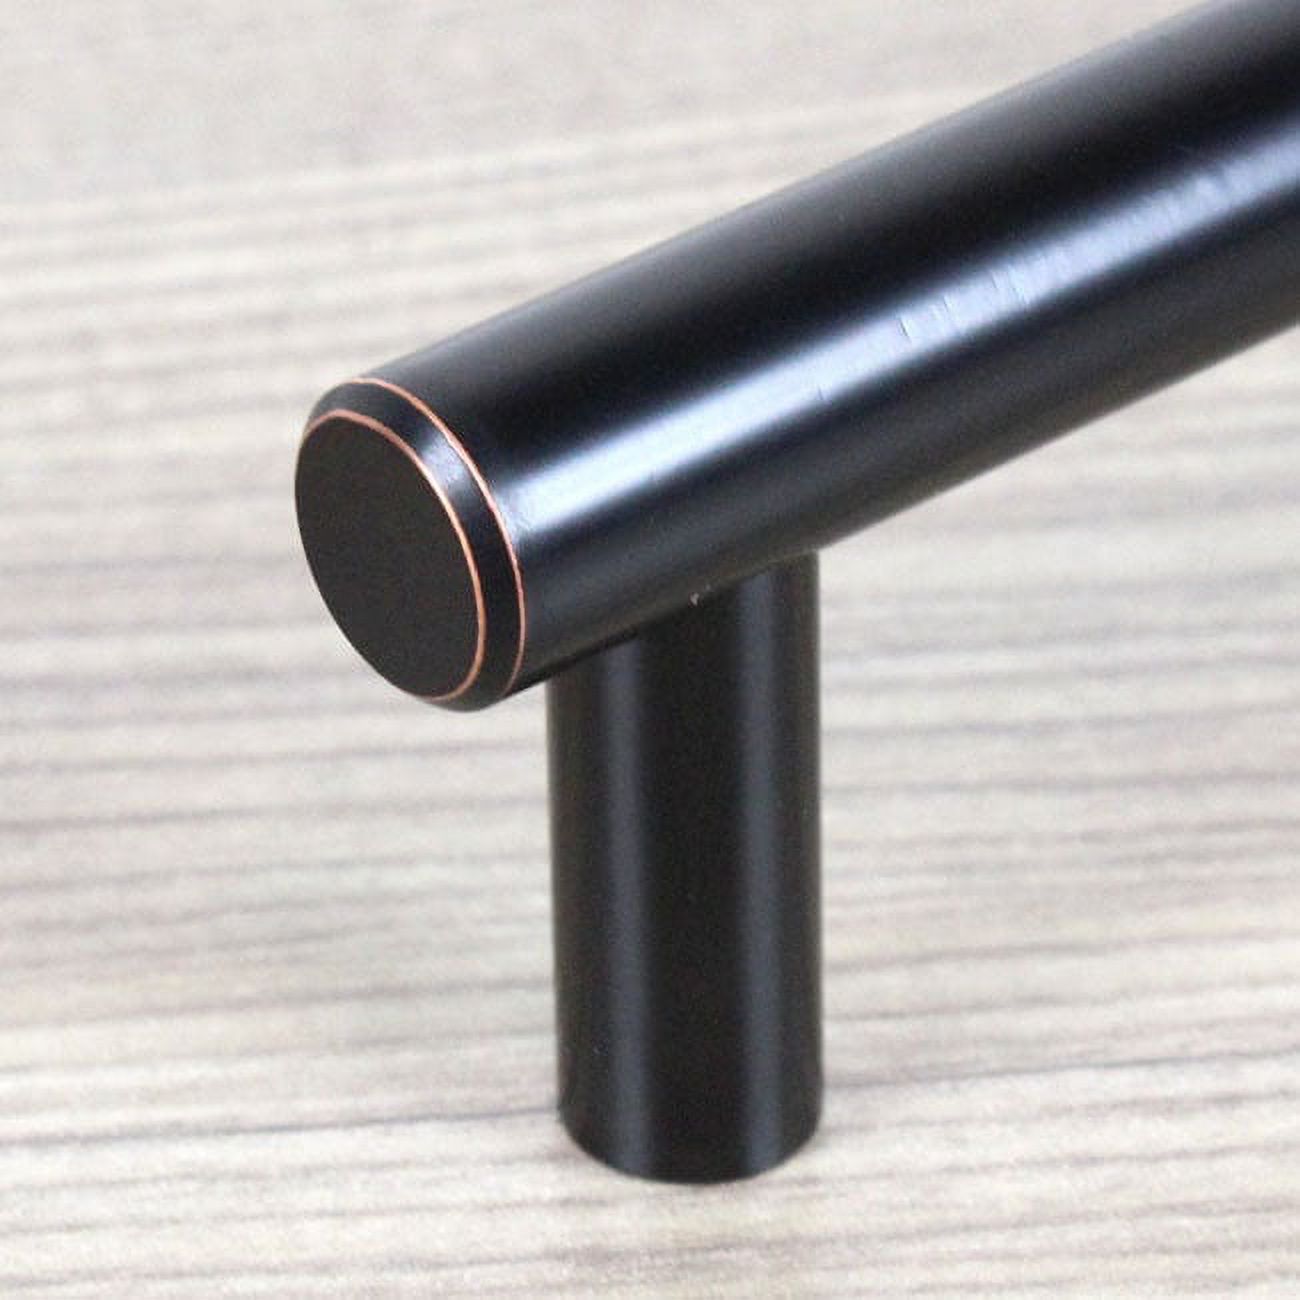 6" Solid Oil Rubbed Bronze Cabinet Bar Pull Handle 6-inch (150mm) Solid Oil Rubbed Bronze Cabinet Bar Pull Handles (Case of 5) - image 5 of 5